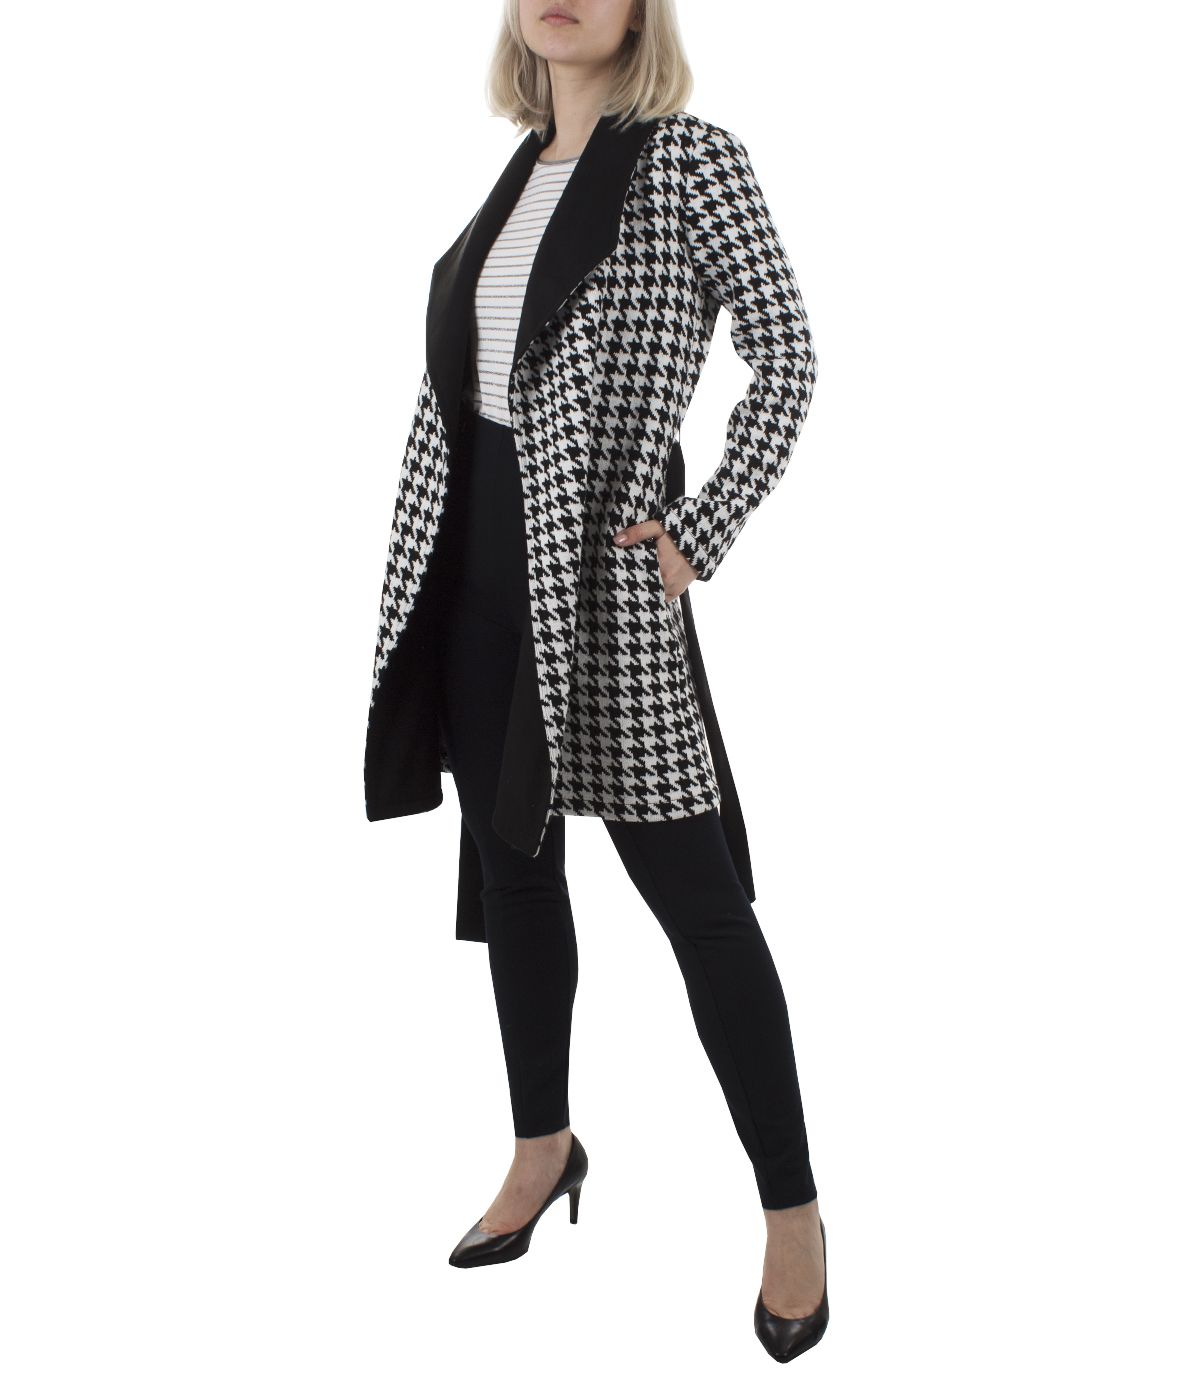 Acrylic wrap-around jacket with contrasting belt and lapel and houndstooth print 2